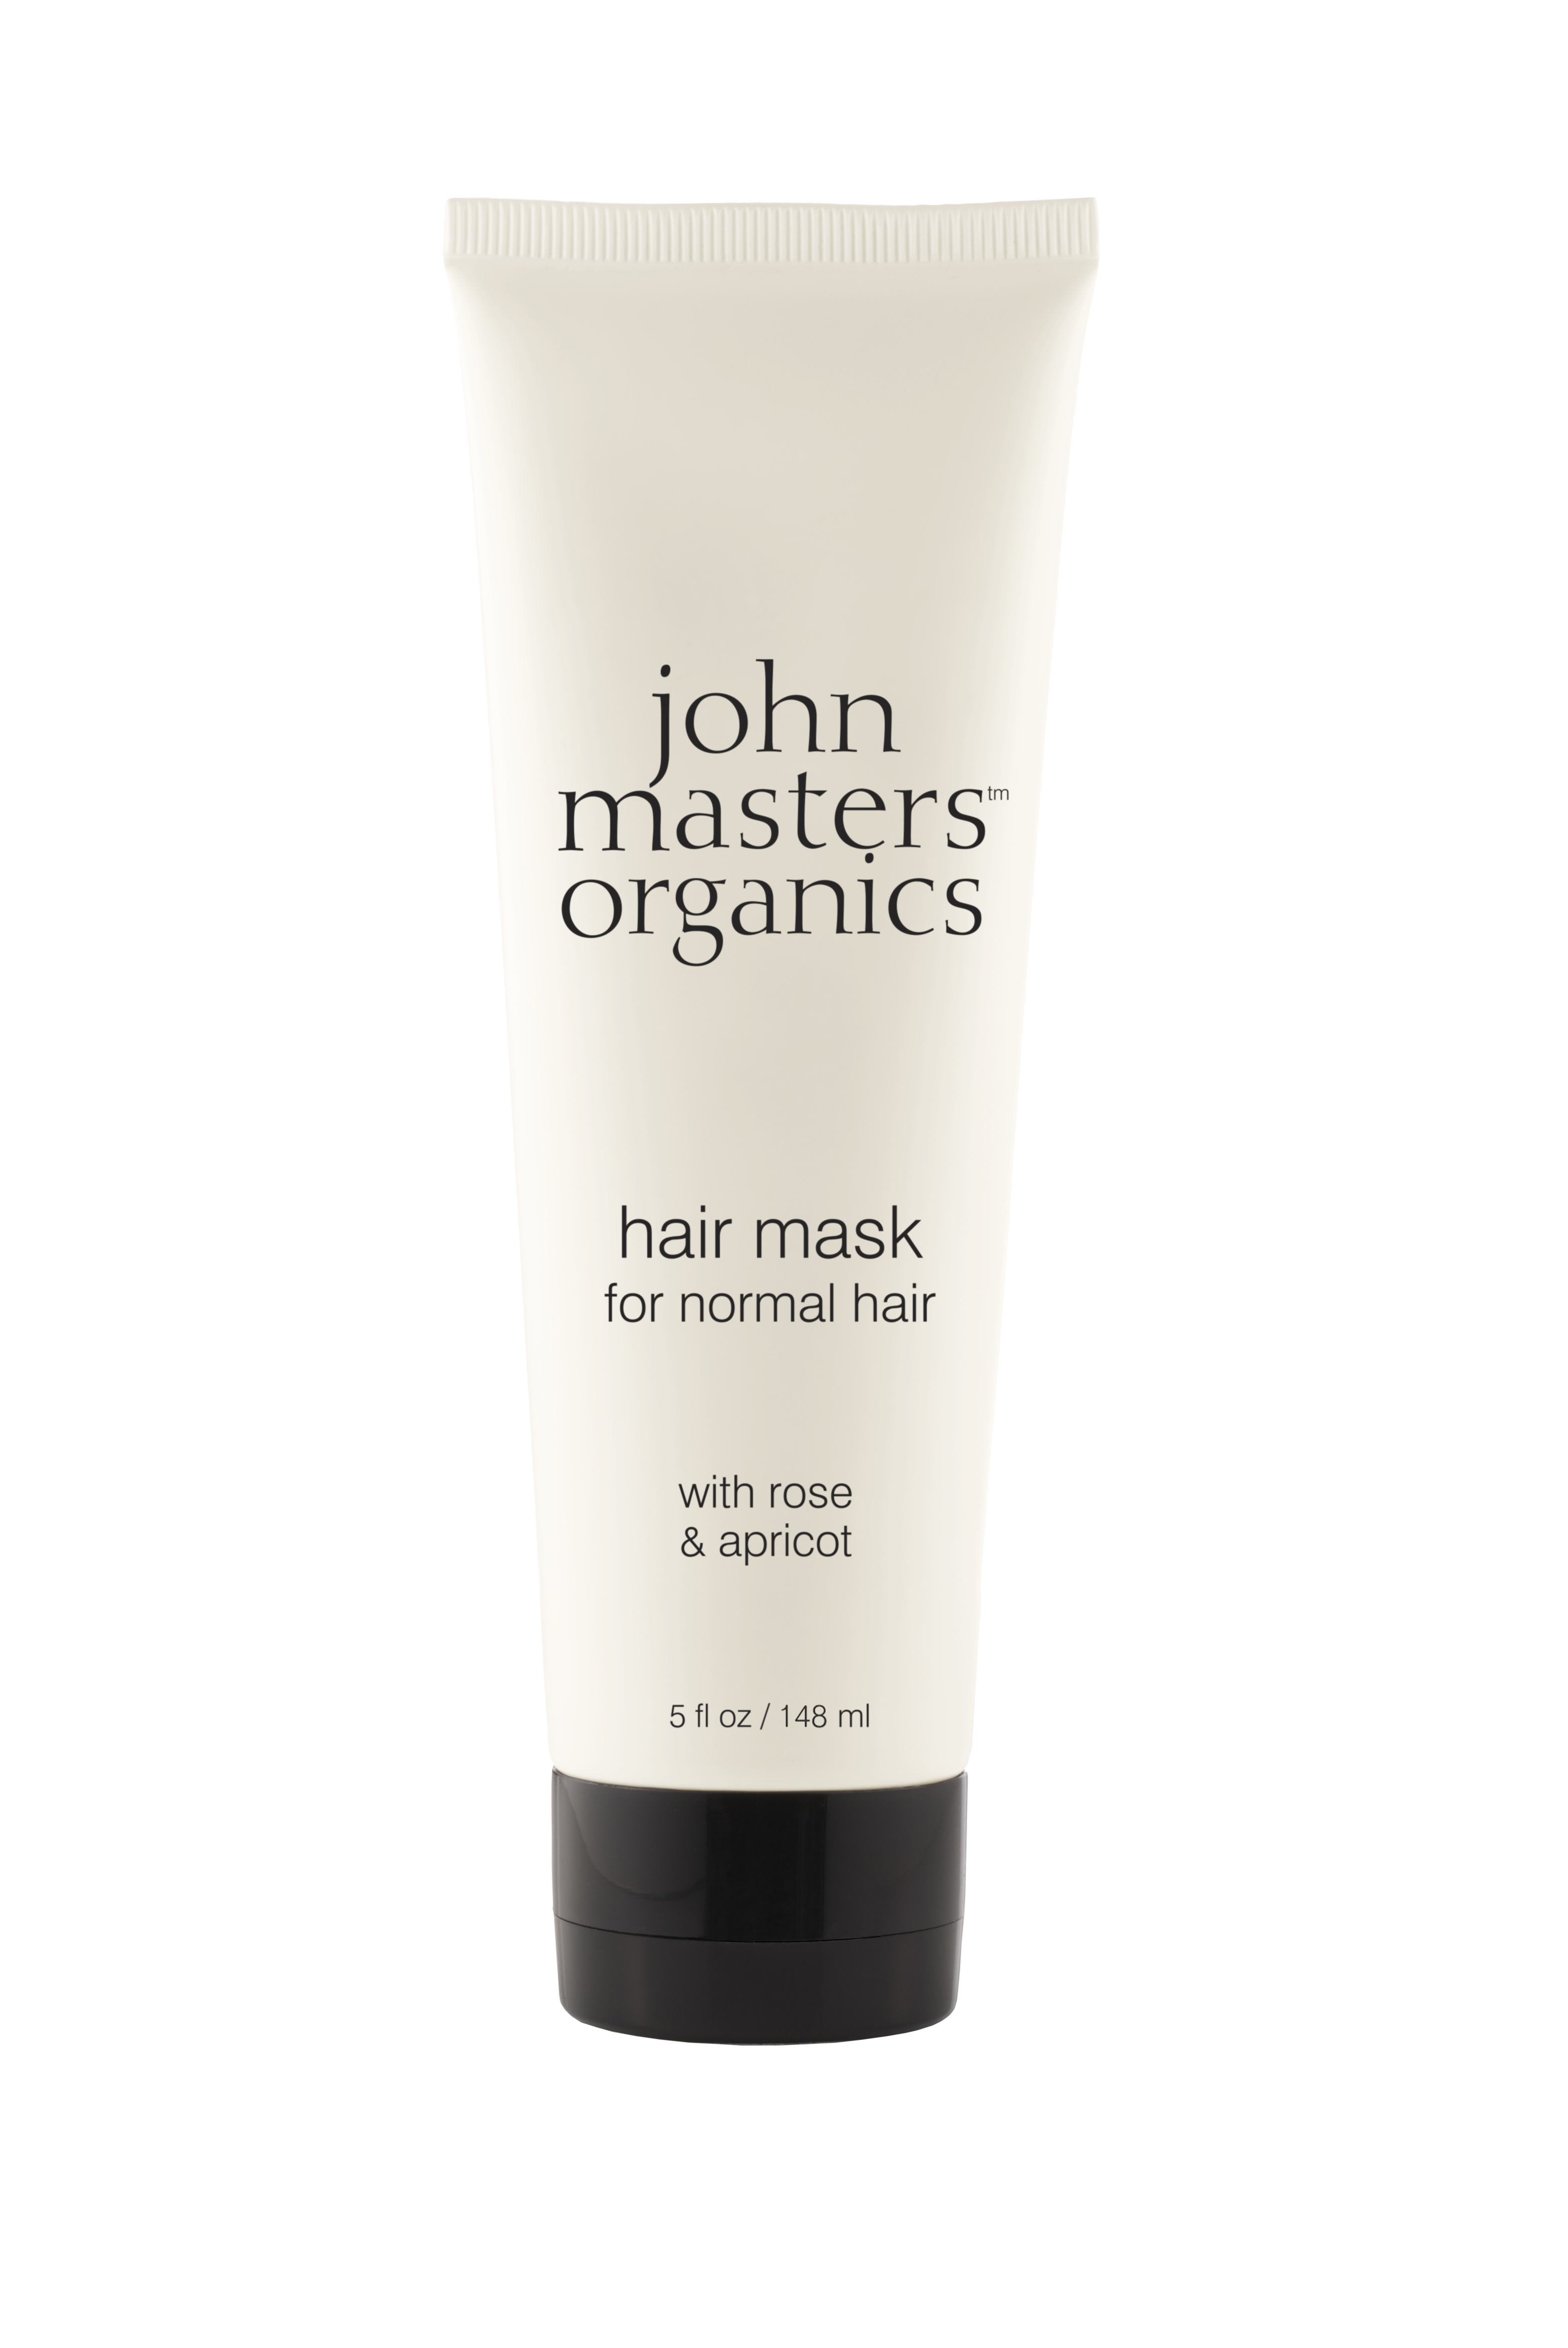 HAIR MASK FOR NORMAL HAIR WITH ROSE & APRICOT 148ml